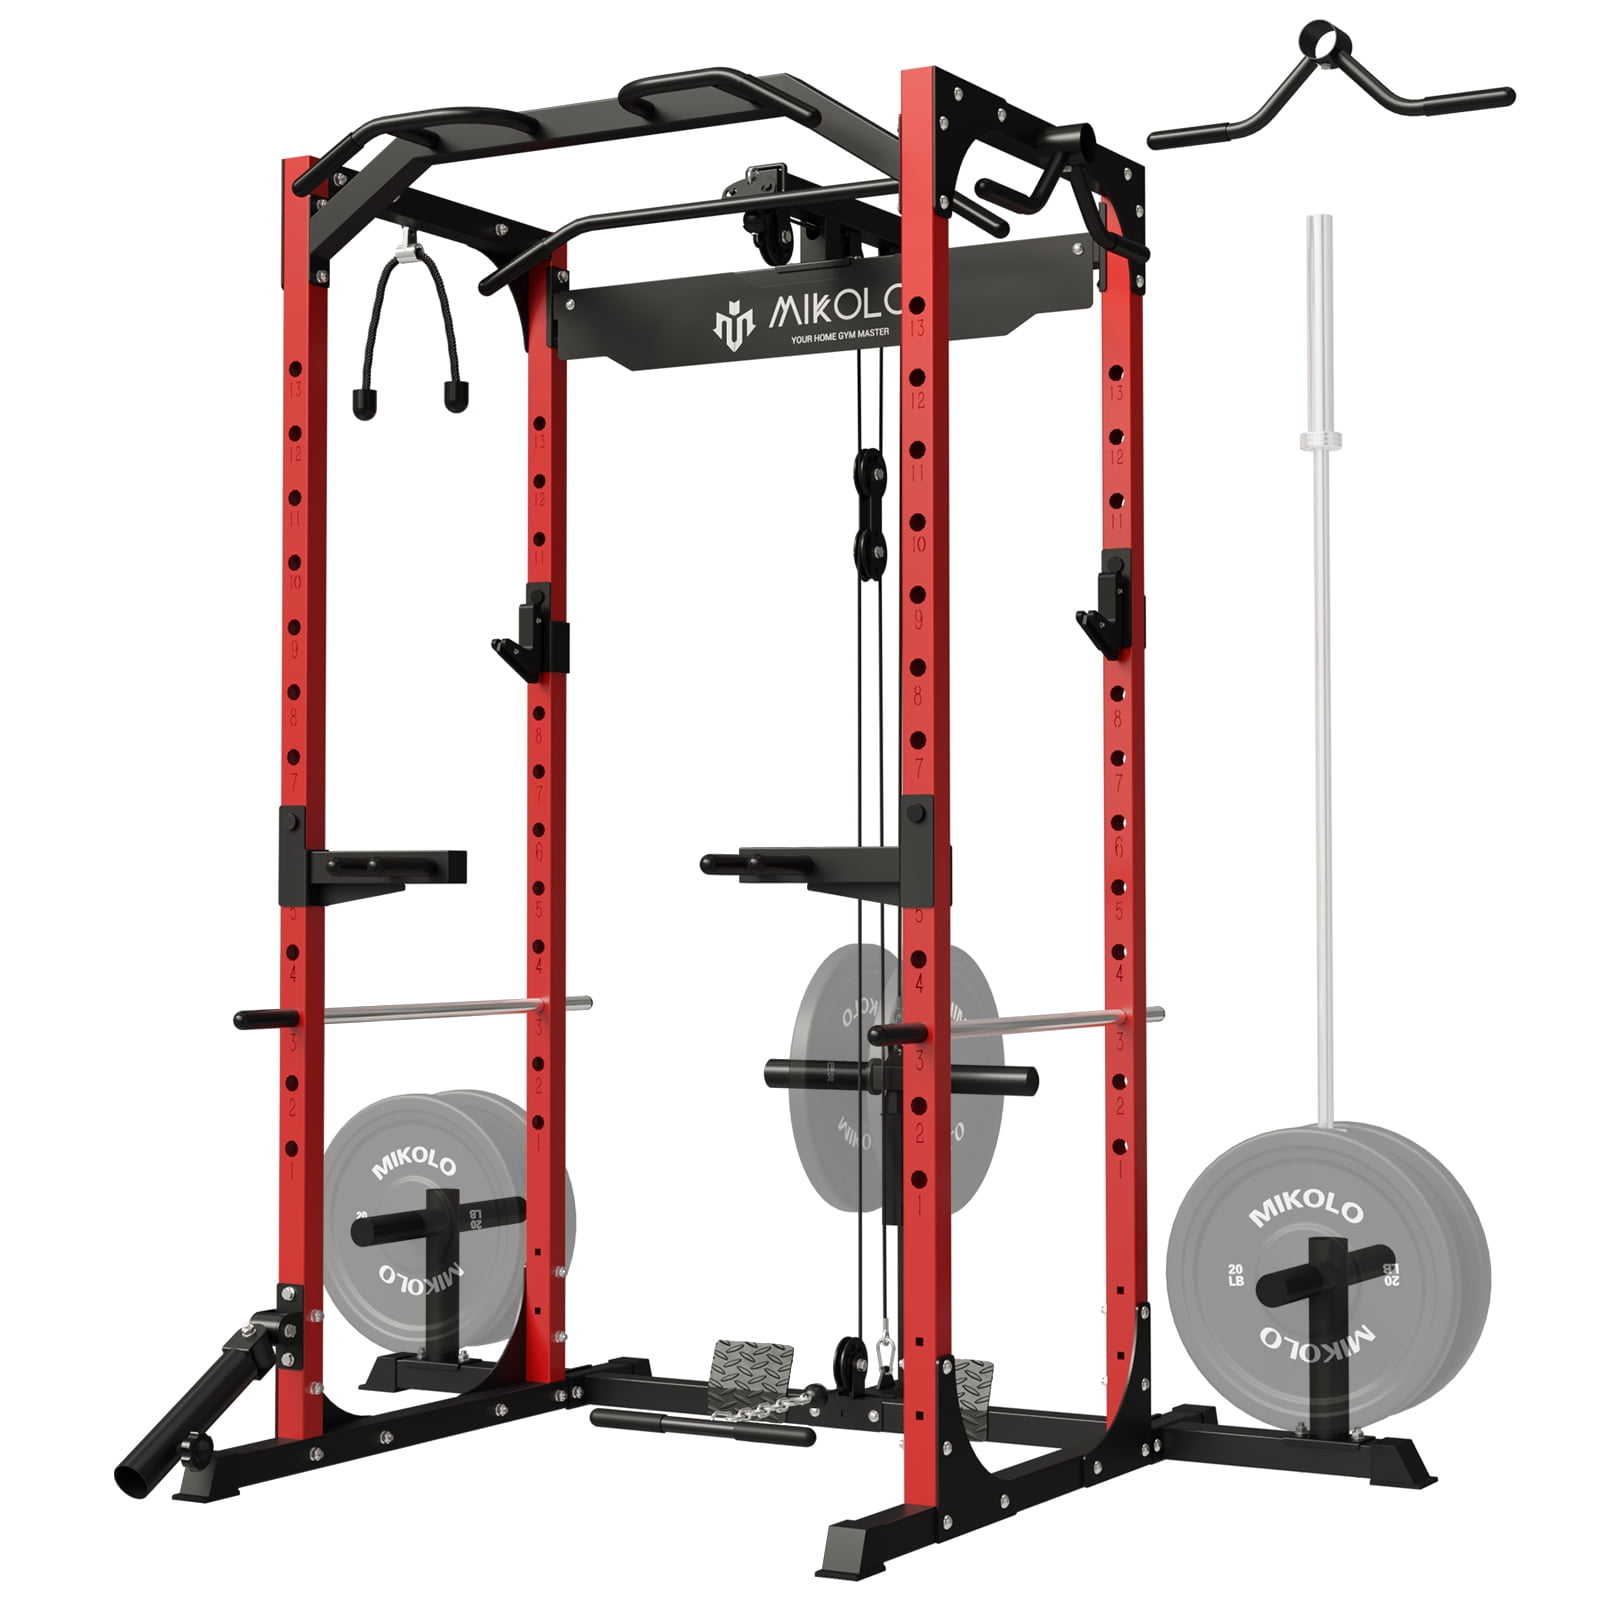 Mikolo Power Rack LAT Pulldown System,1200LBS Capacity Power Rack, Multi-Functional Squat Rack with 13-Level Adjustable Height and J-Hooks, Dip Bars, T-Bar, Equipment - Walmart.com